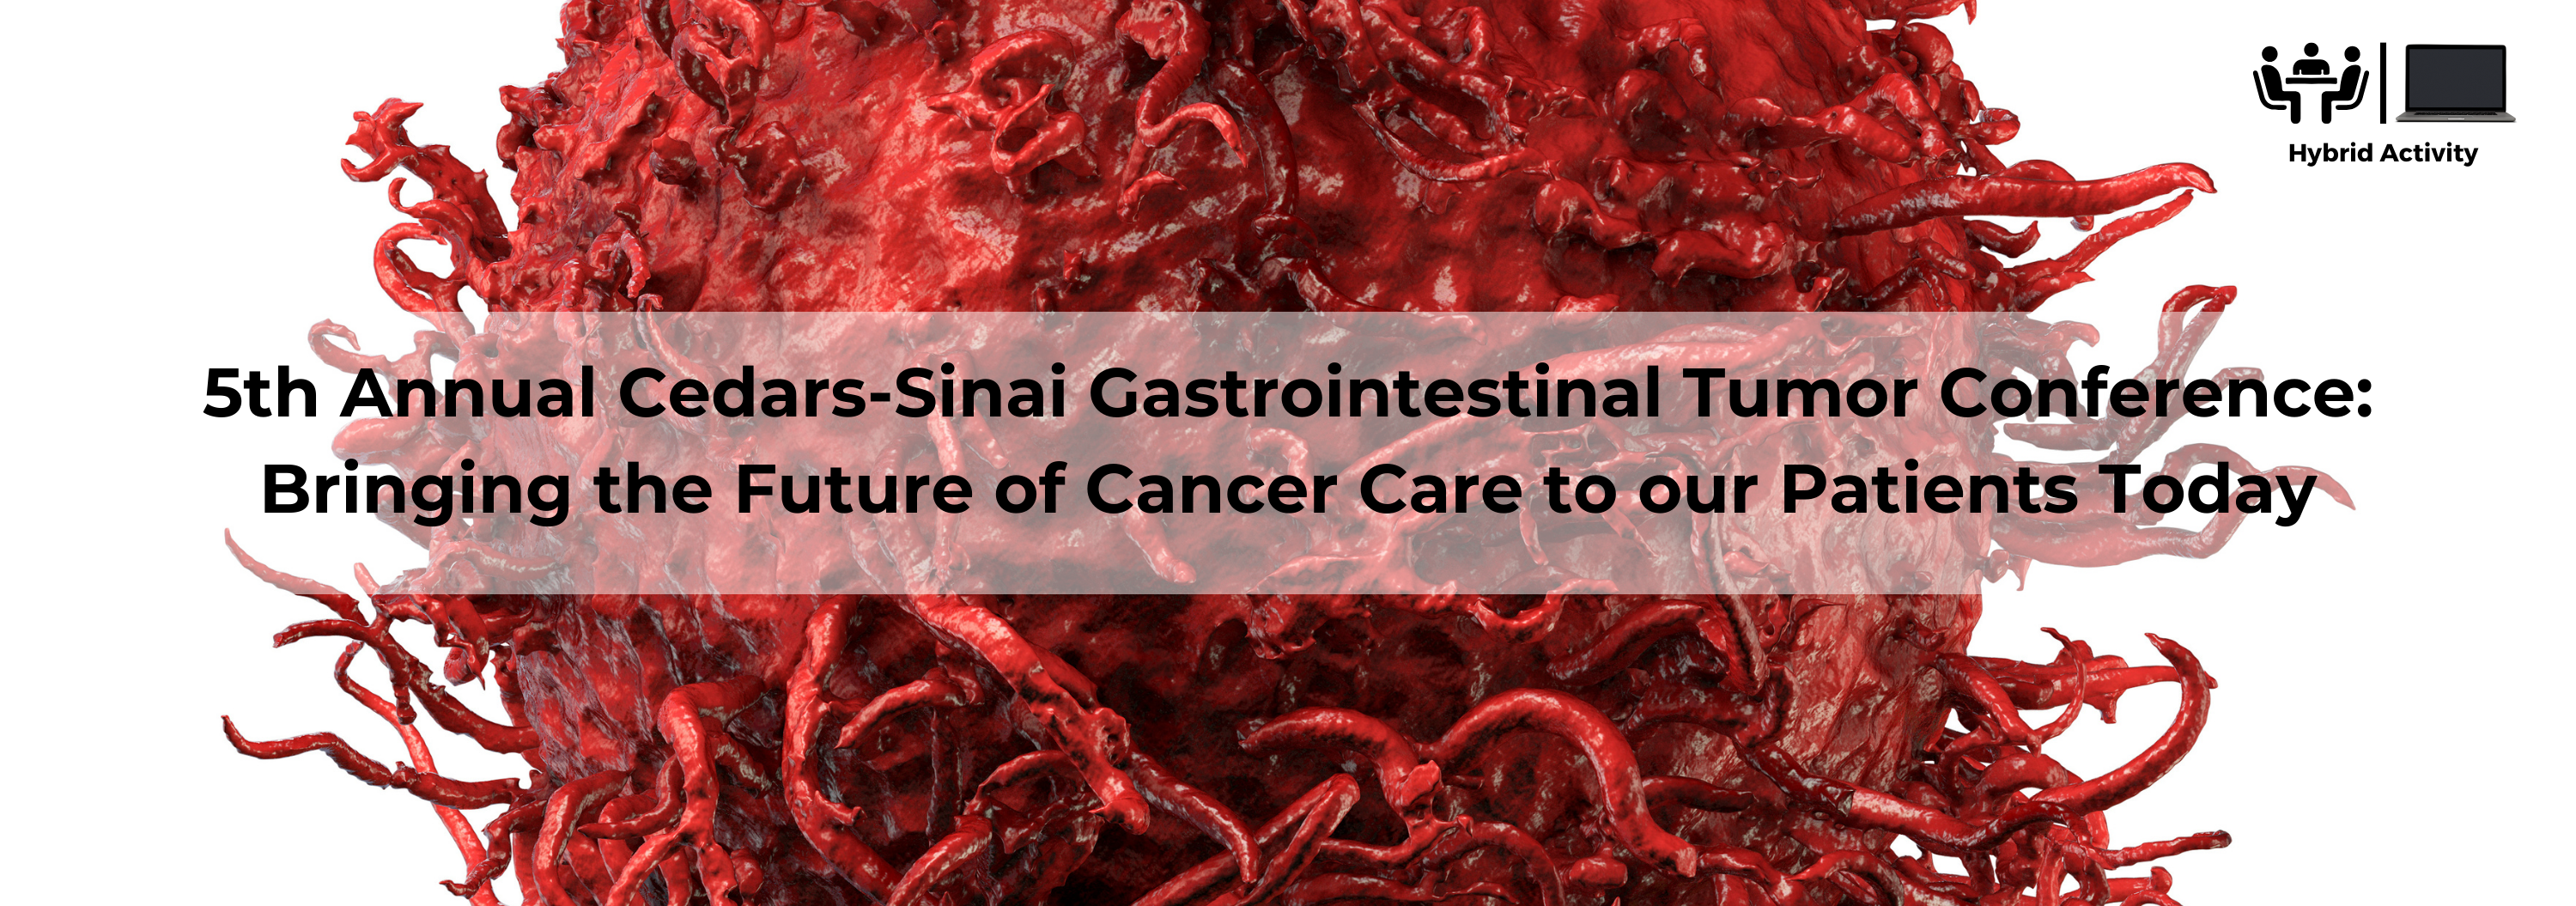 5th Annual Cedars-Sinai Gastrointestinal Tumor Conference: Bringing the Future of Cancer Care to our Patients Today Banner